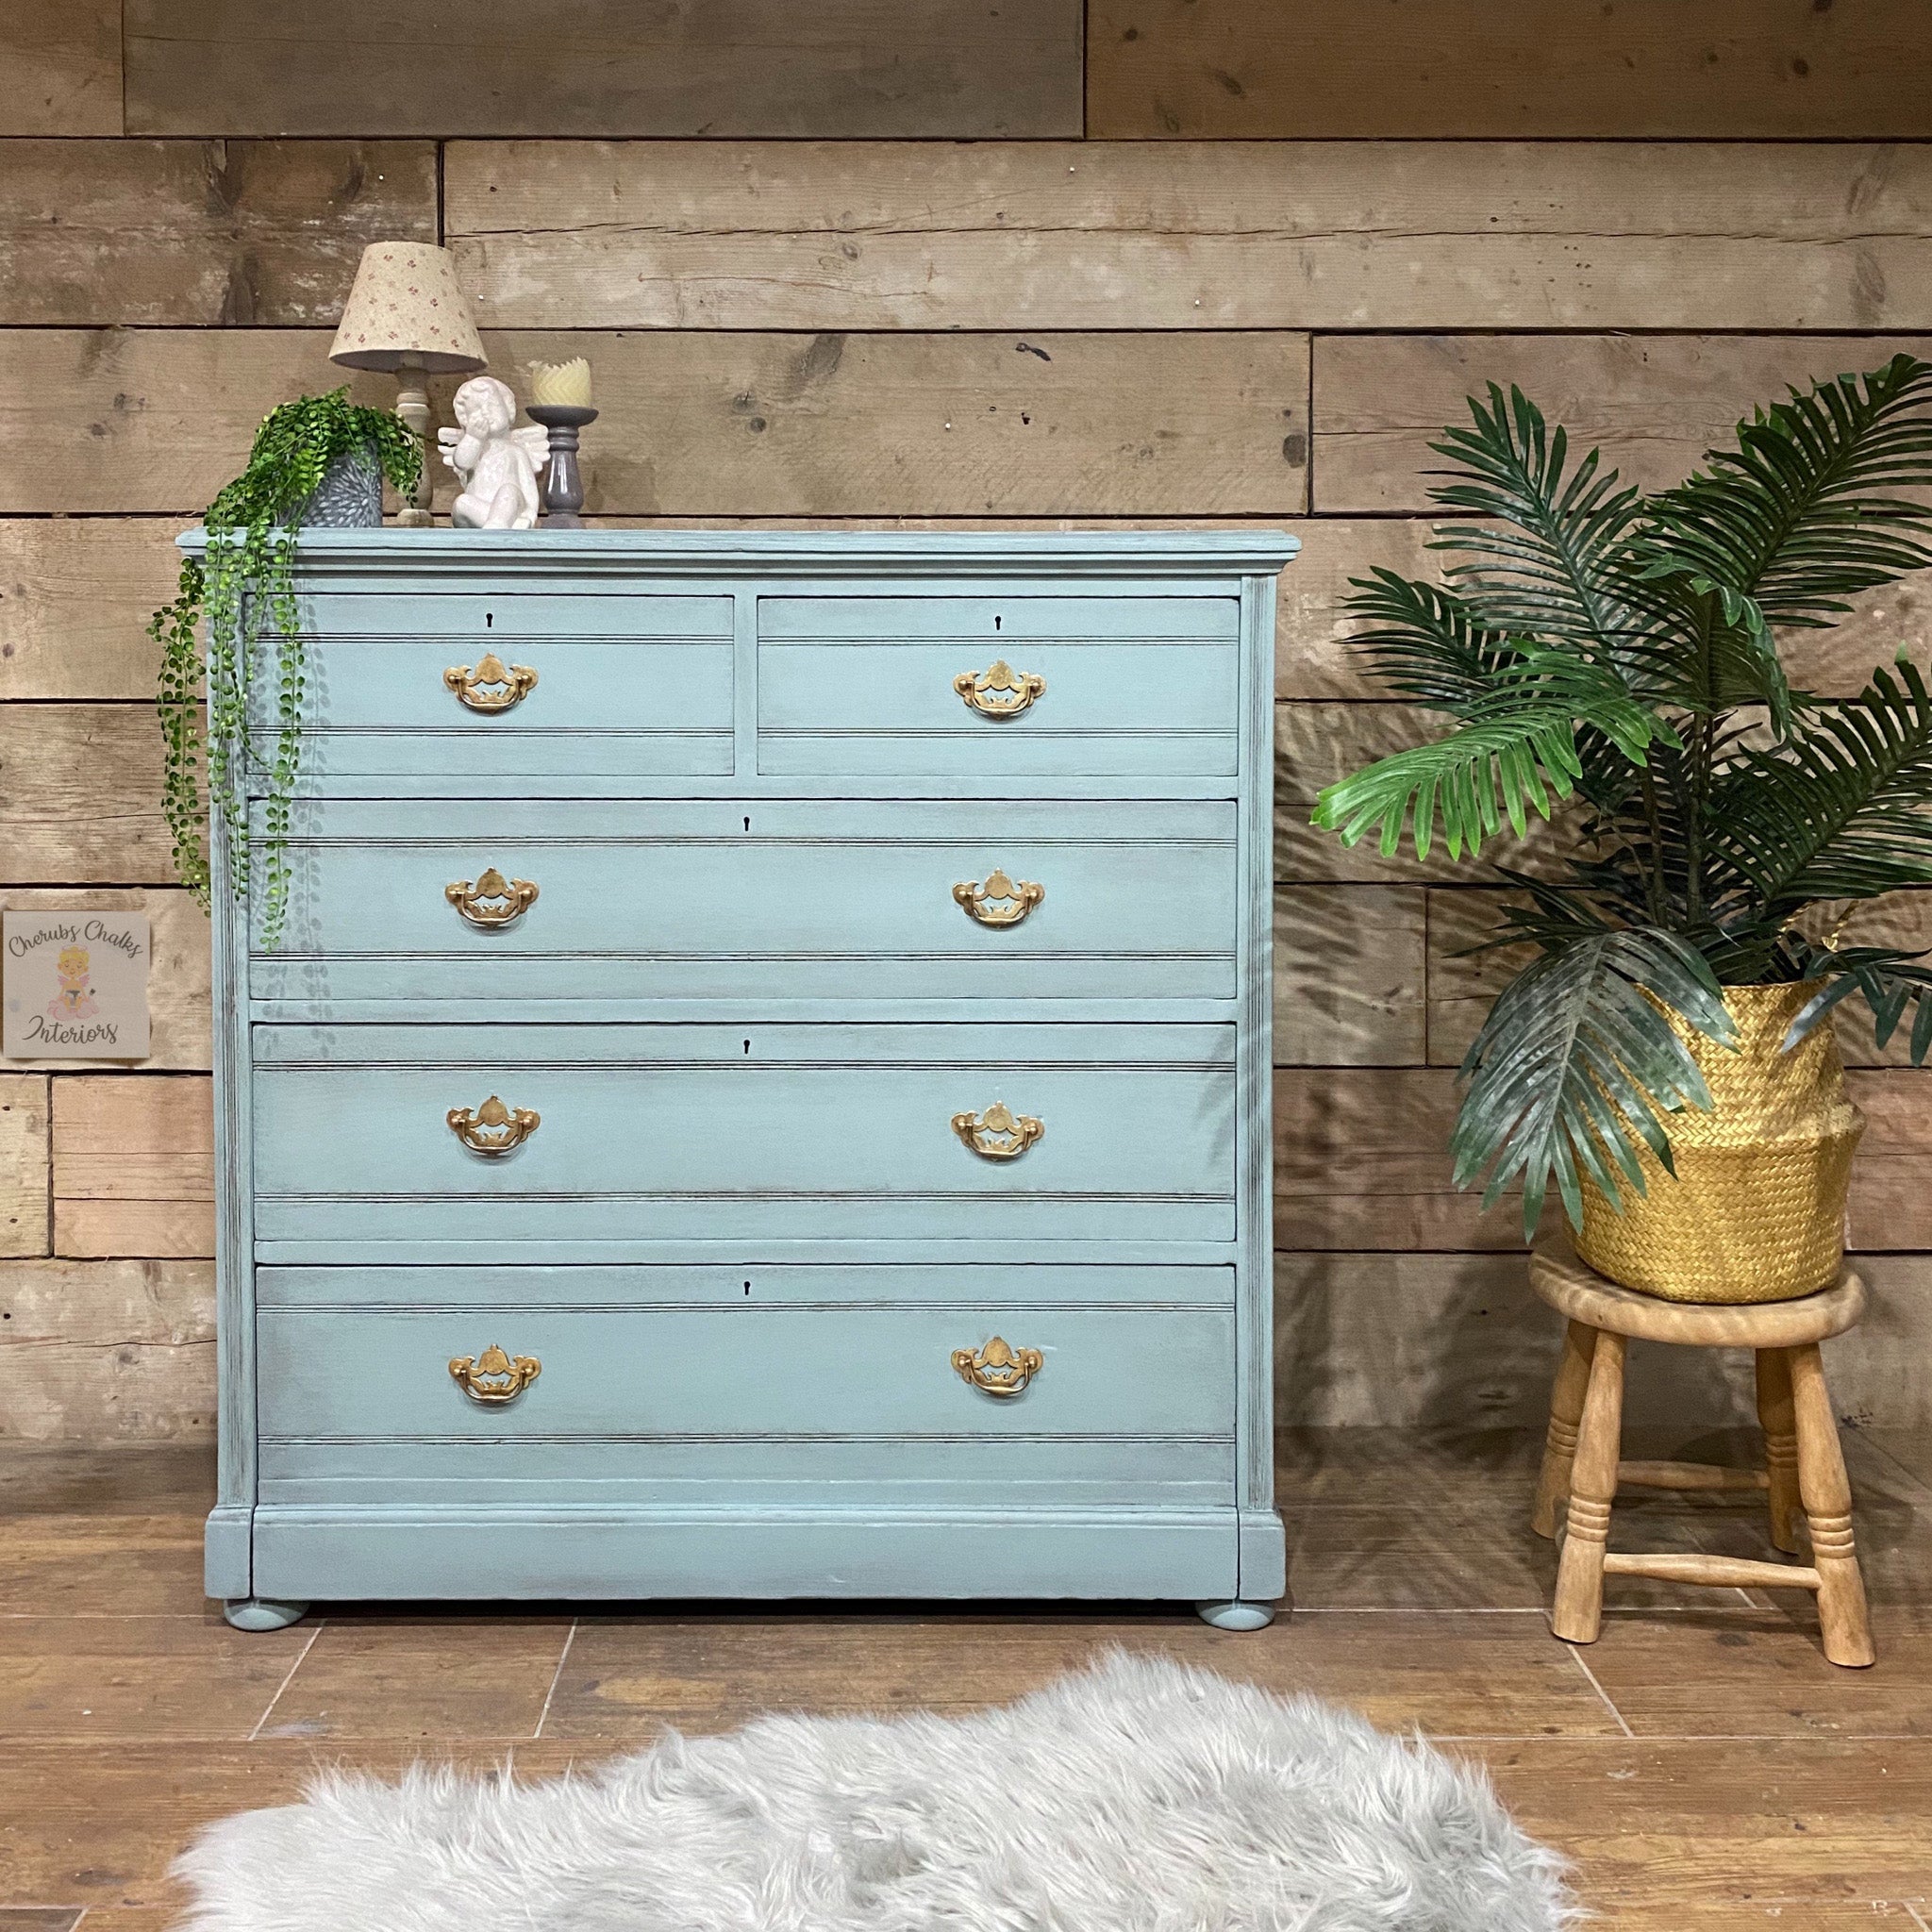 A vintage 5-drawer chest dresser refurbished by Cherubs Chalks Interiors is painted in Dixie Belle's Vintage Duck Egg chalk mineral paint.